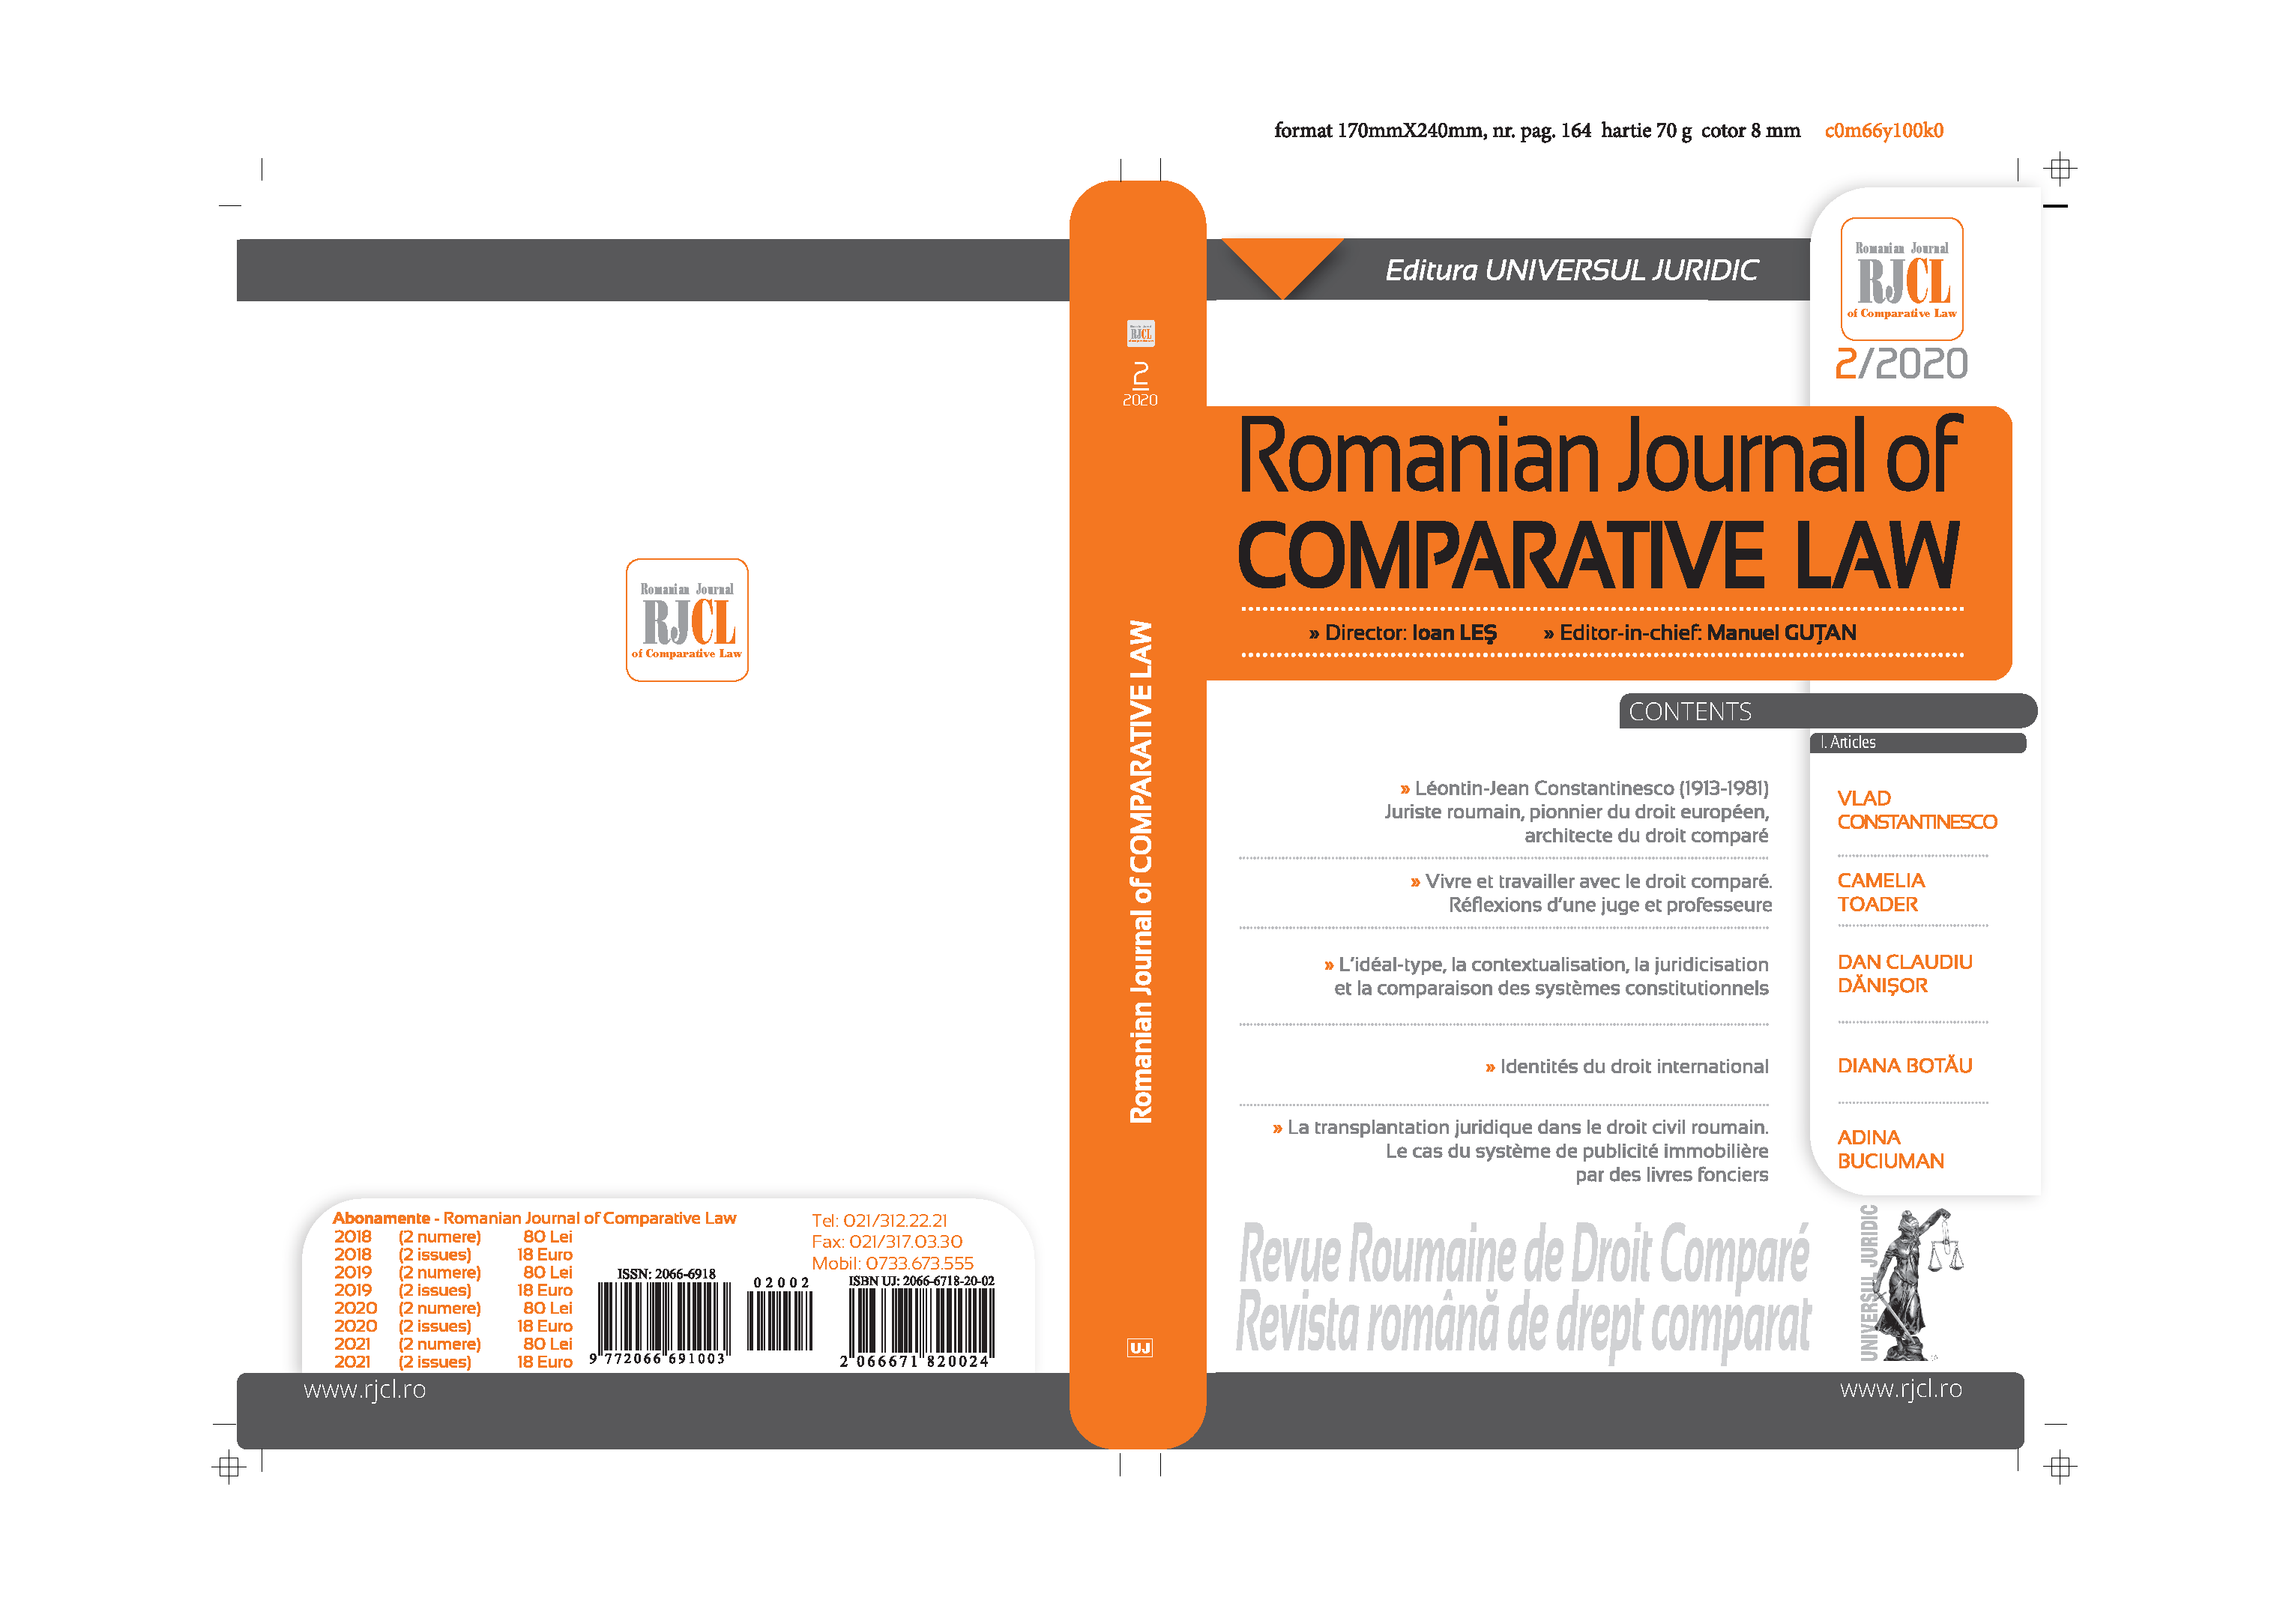 Legal transplantation into Romanian civil law. The case of the real estate advertising system using land books Cover Image